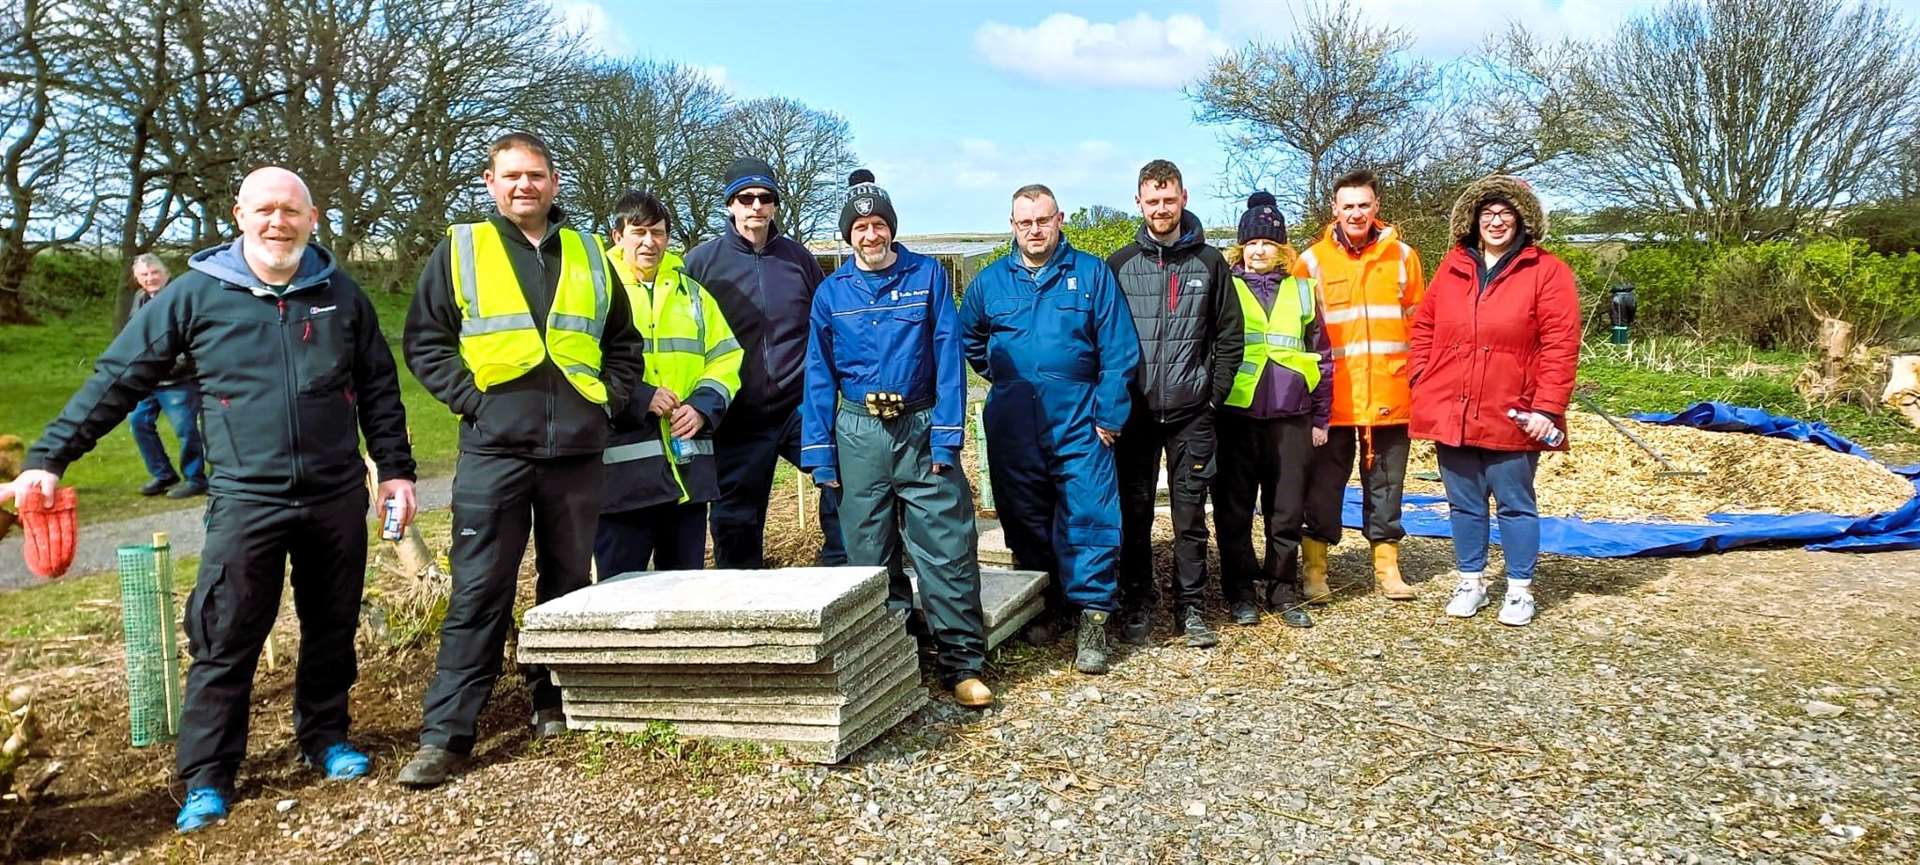 Wick Paths Group volunteers along with Rolls Royce workers helped clear up pathways around Wick riverside and the caravan site.